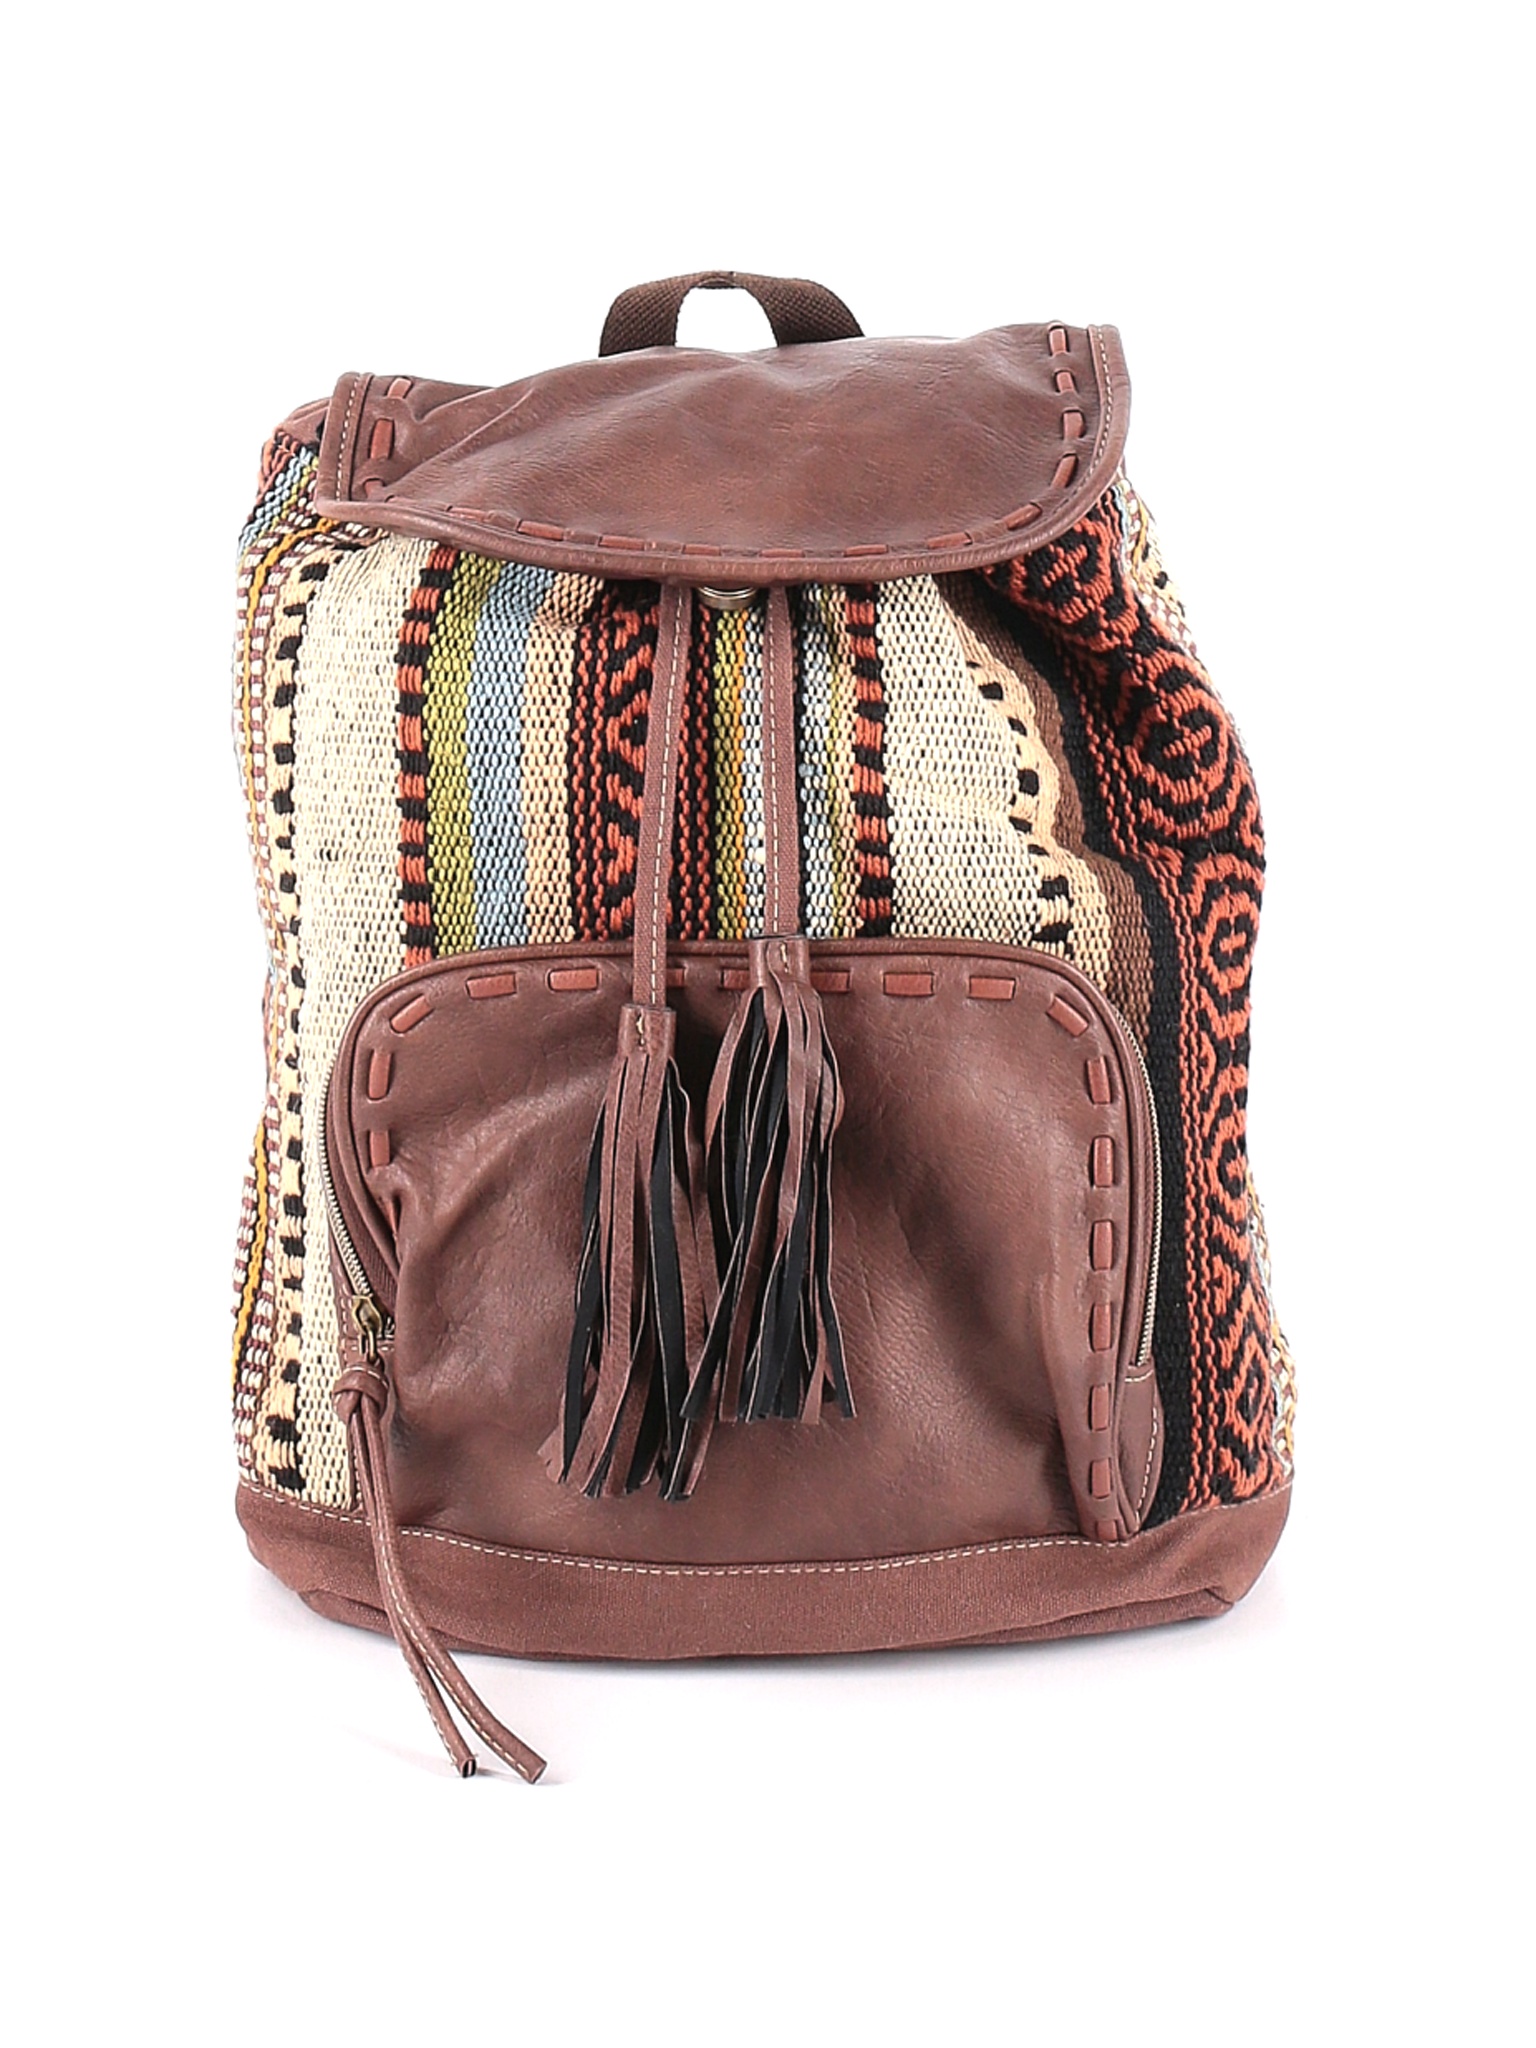 Target Limited Edition Women Brown Backpack One Size | eBay